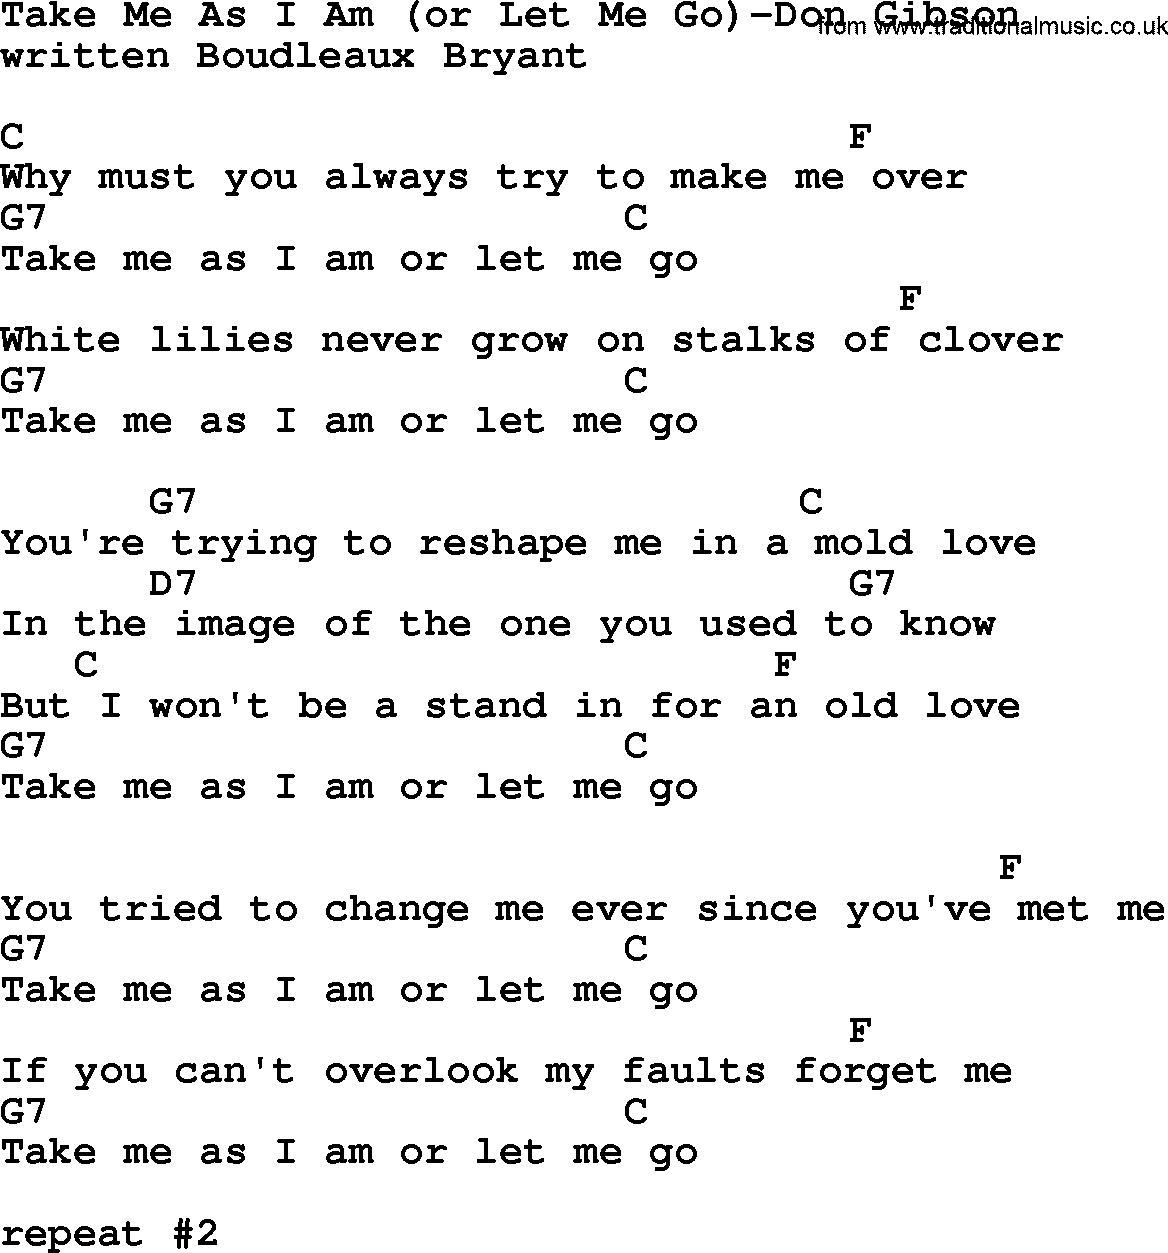 Country music song: Take Me As I Am(Or Let Me Go)-Don Gibson lyrics and chords